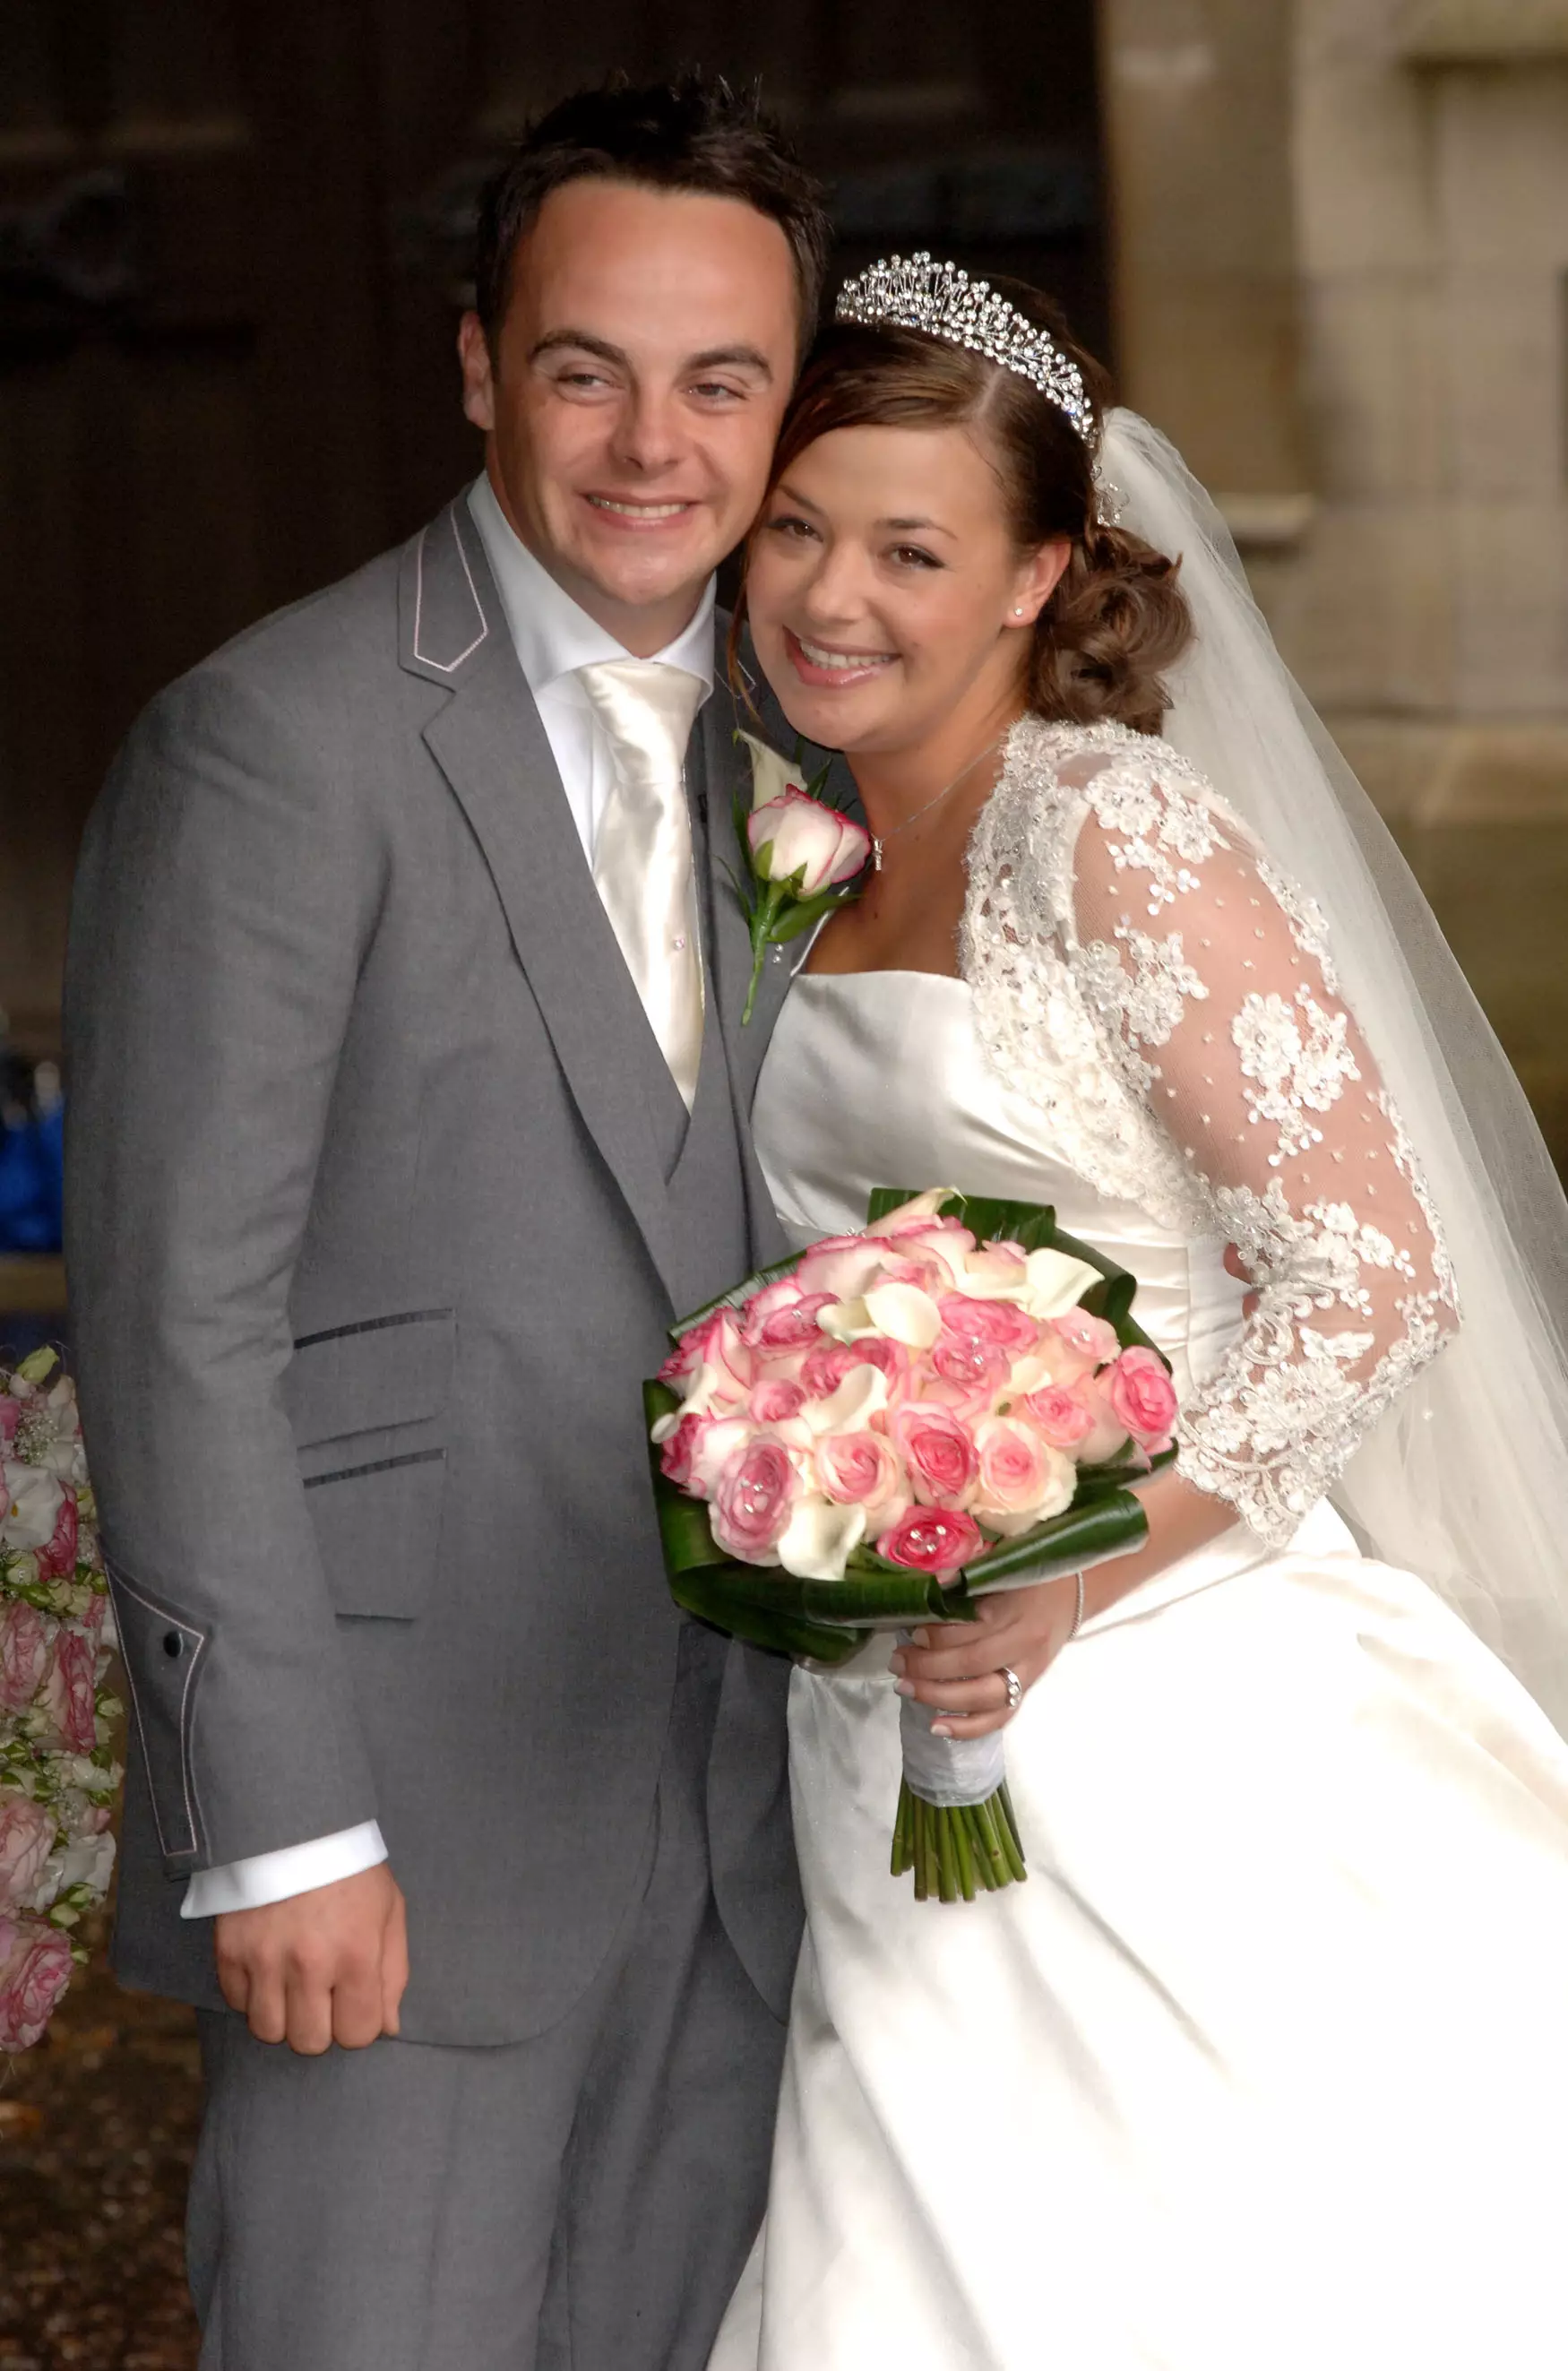 The pair married in 2006.